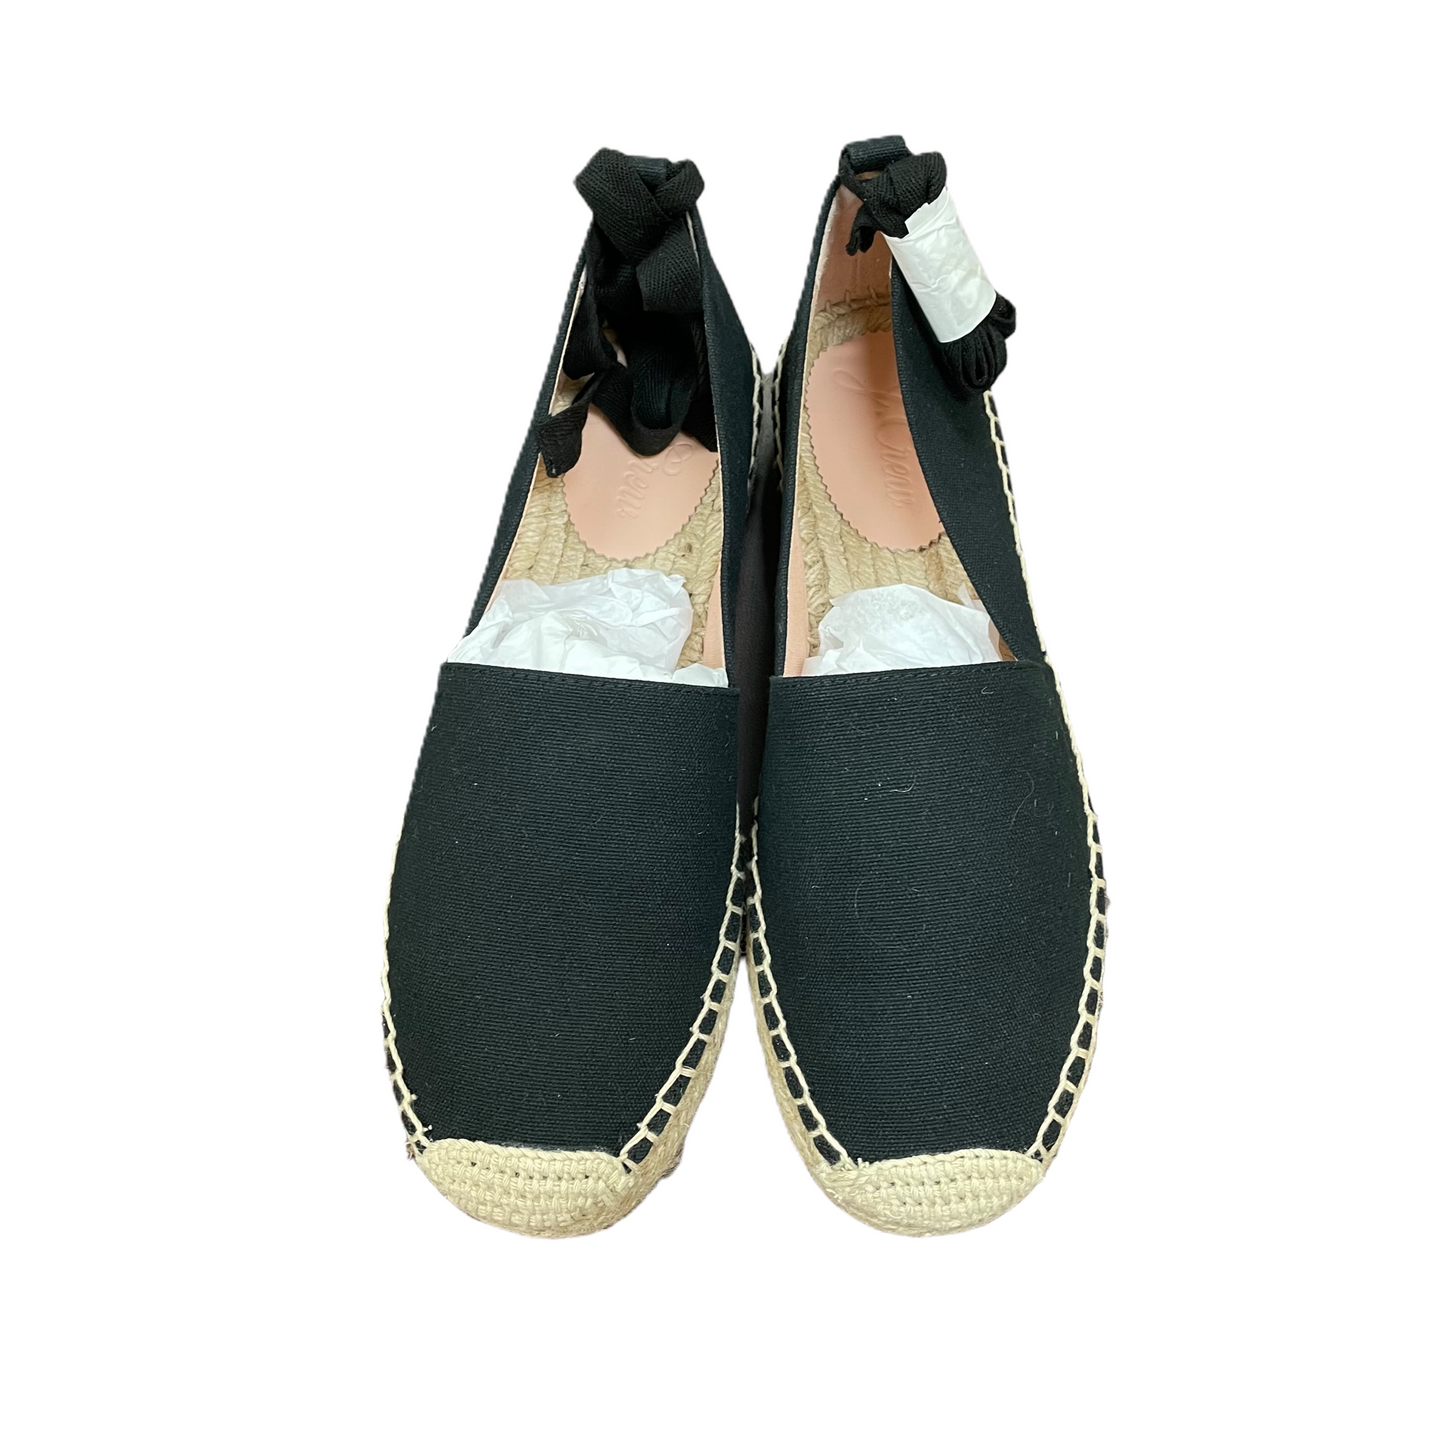 Black Shoes Flats By J. Crew, Size: 8.5